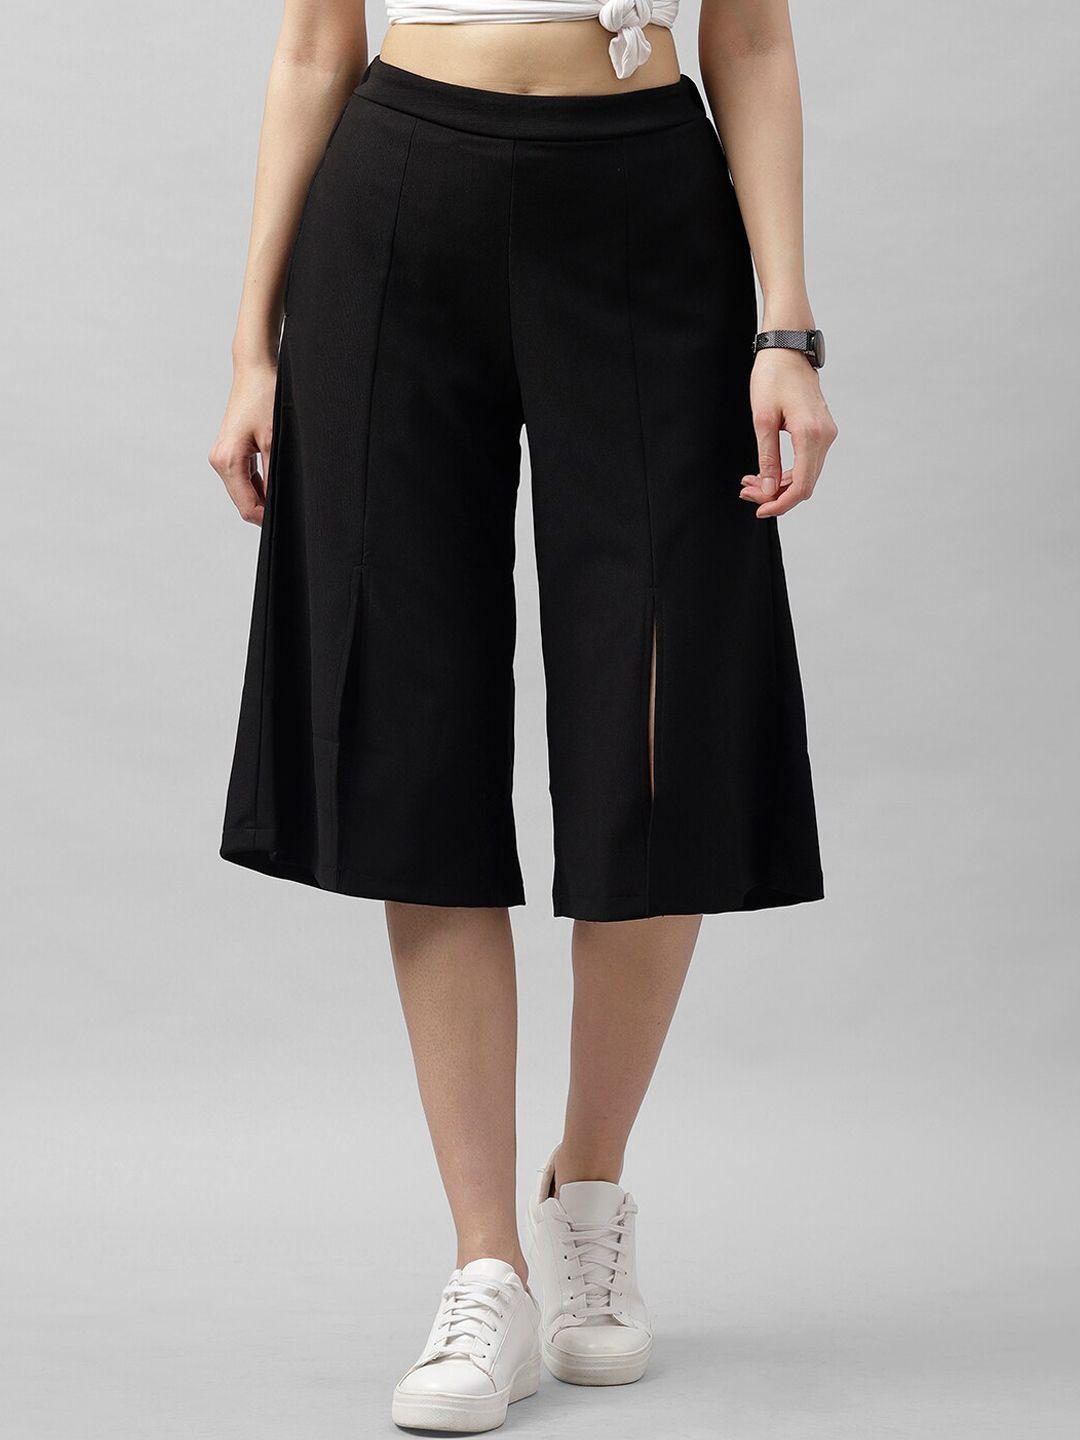 athena women black flared solid culottes